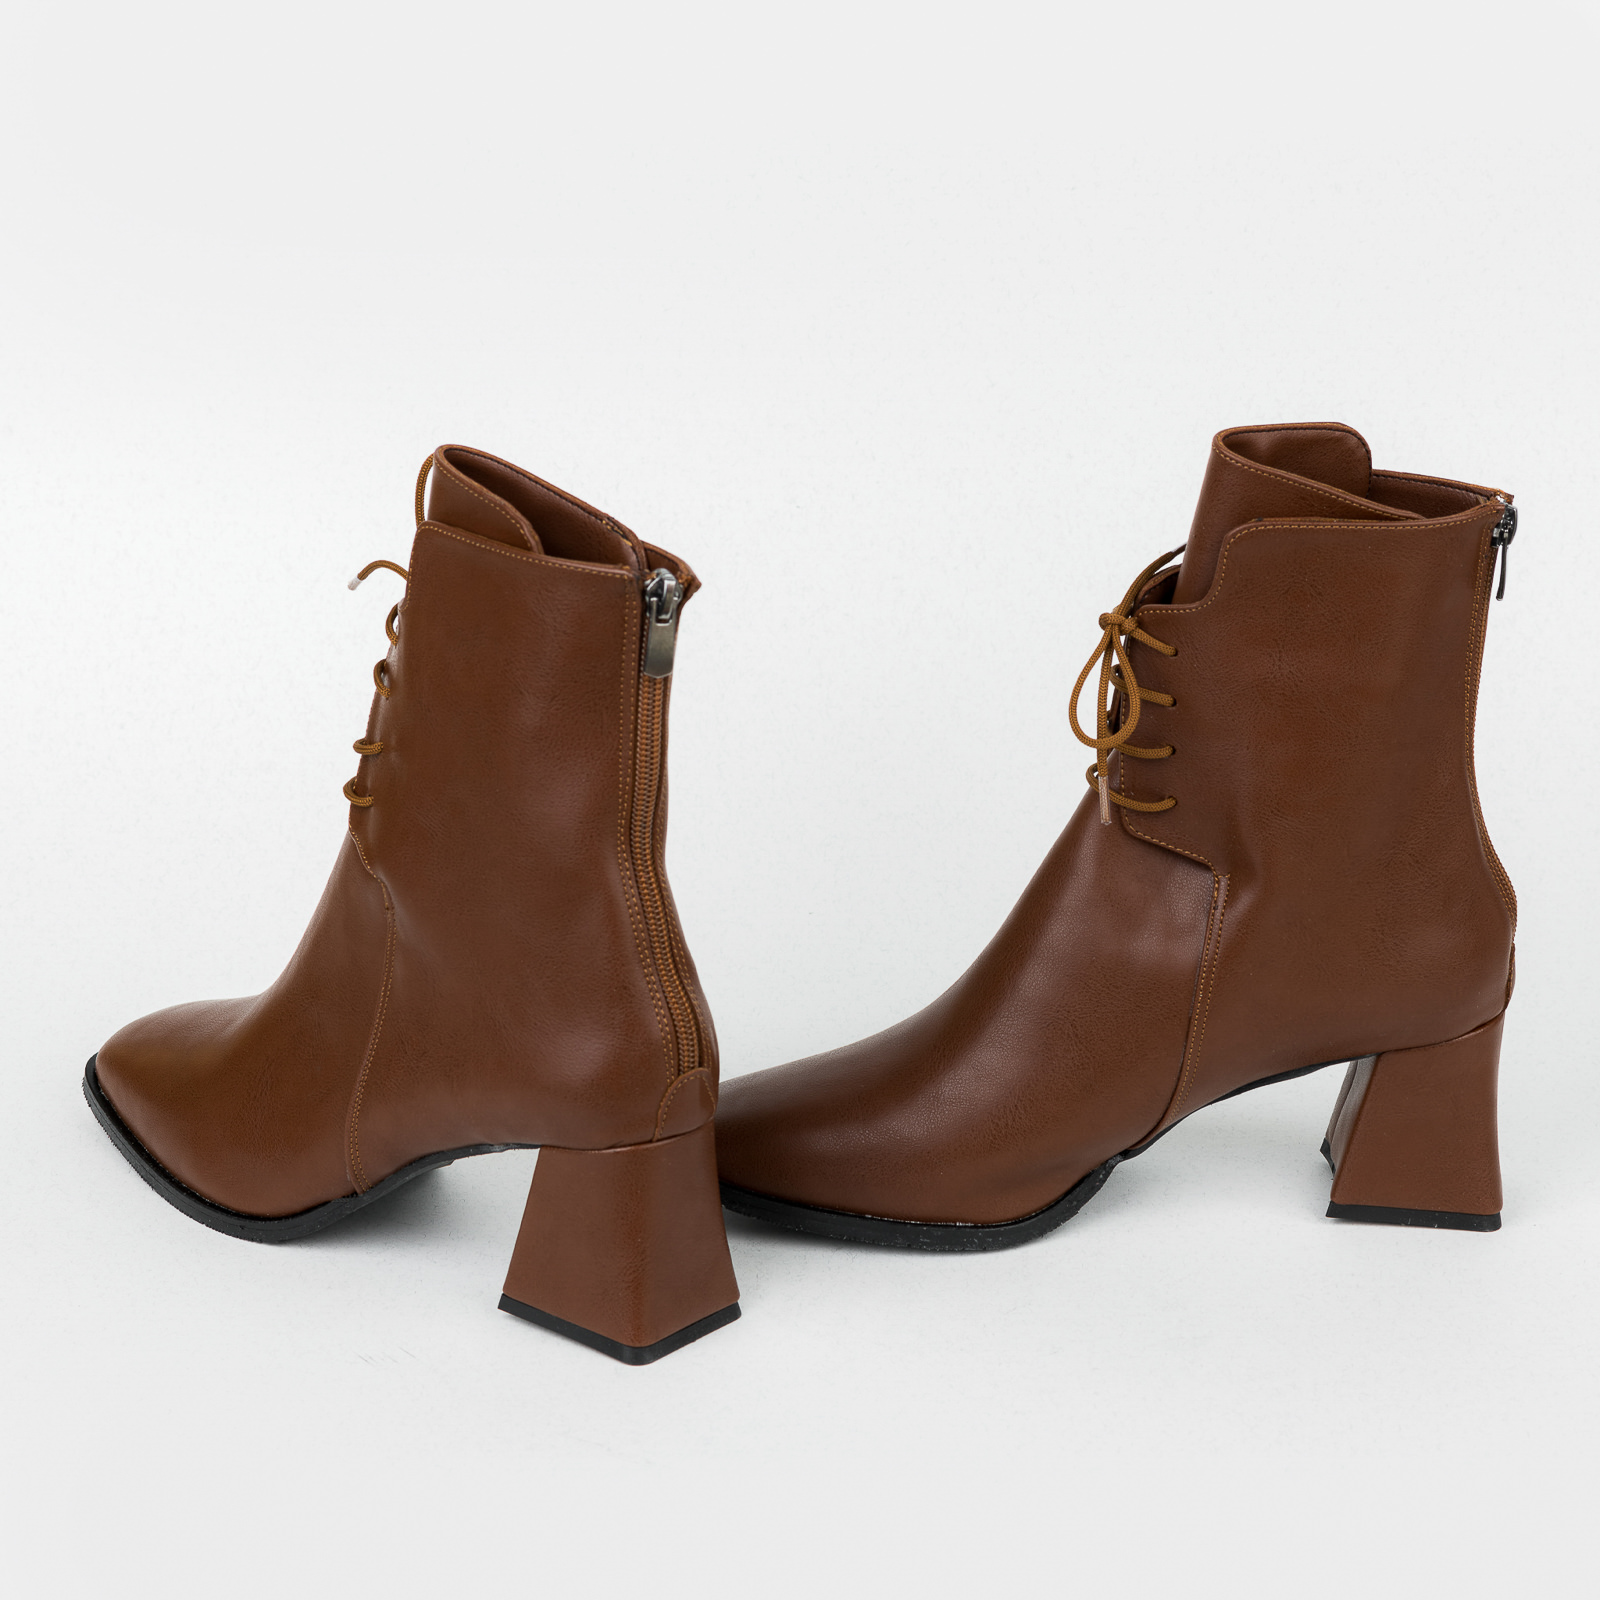 Women ankle boots B399 - CAMEL